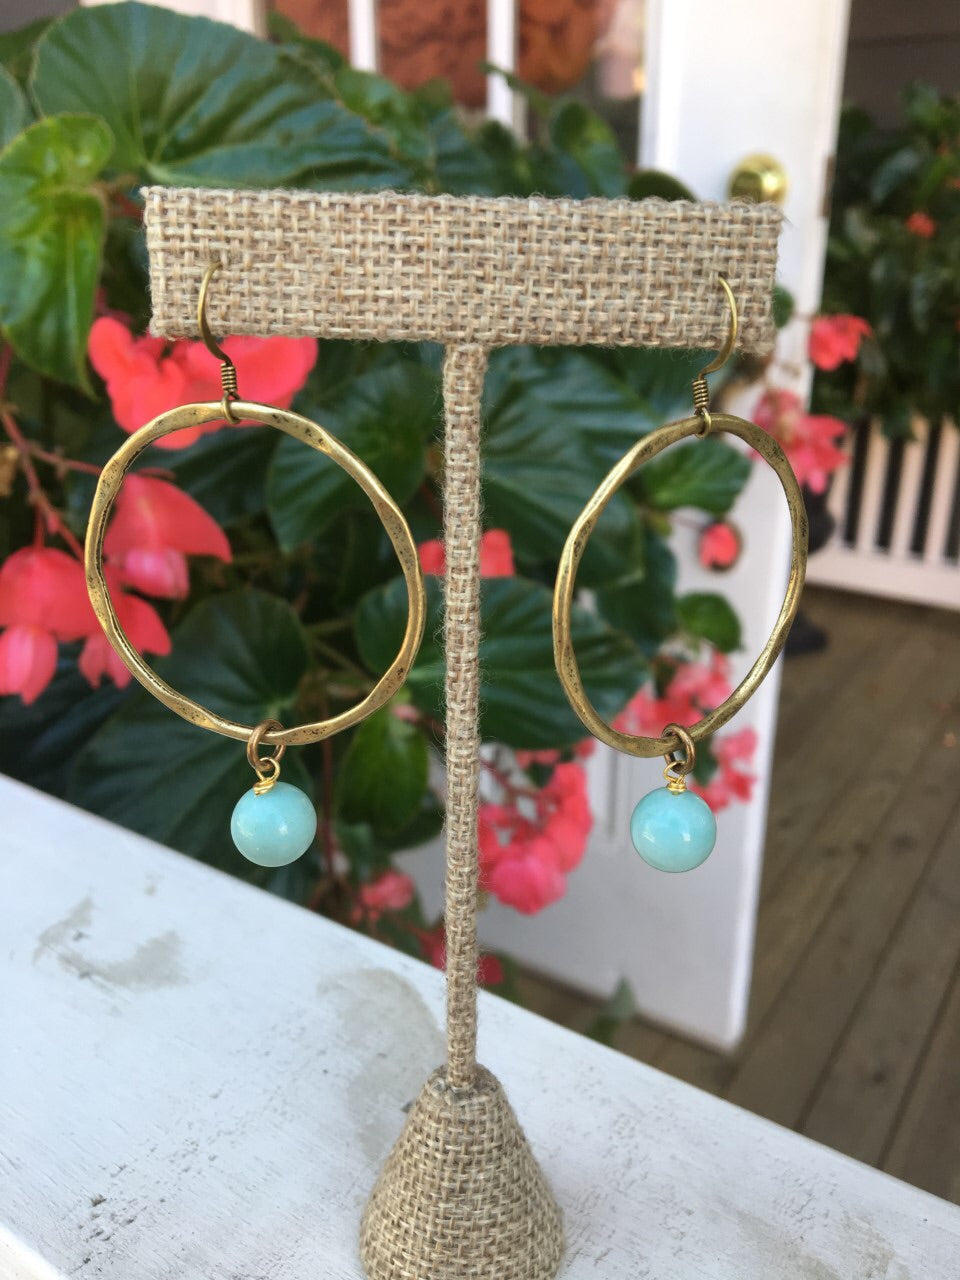 Locally made, these gorgeous pressed hoop earrings which accent beads are the perfect statement piece. 